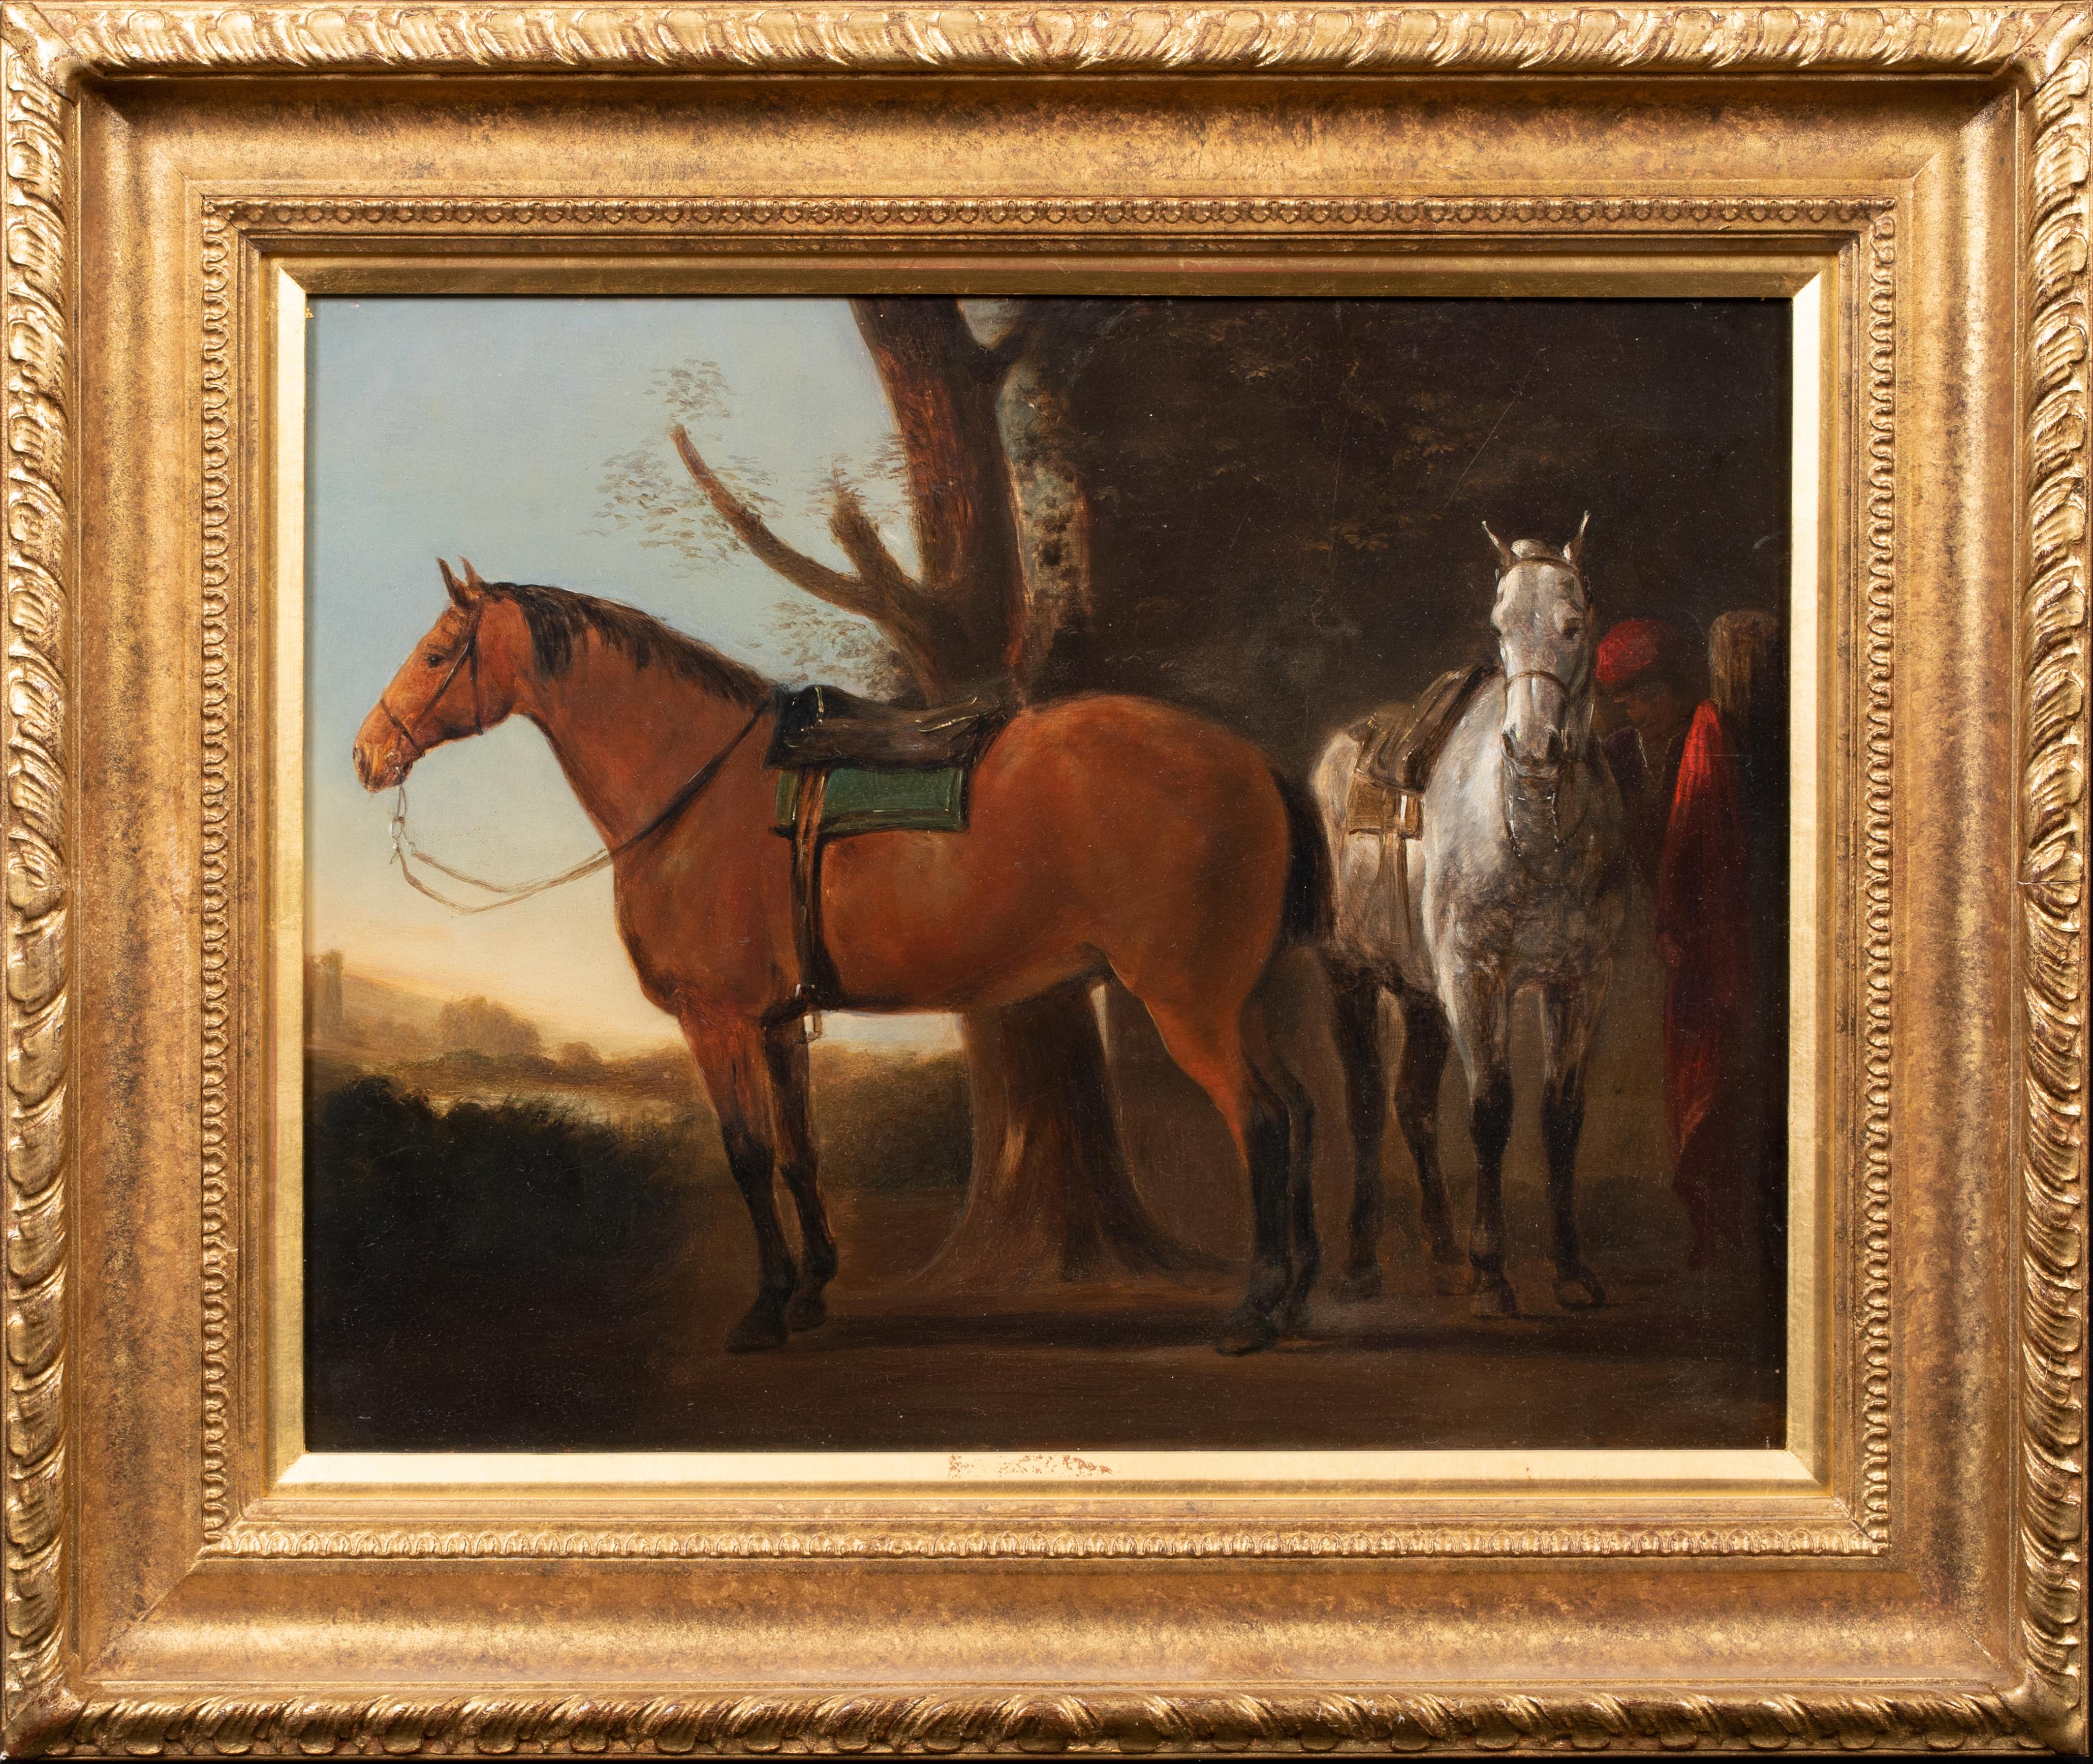 Unknown Portrait Painting - Study Of Horses. 19th Century  by William Henry WHEELWRIGHT (1820-1897) sales to